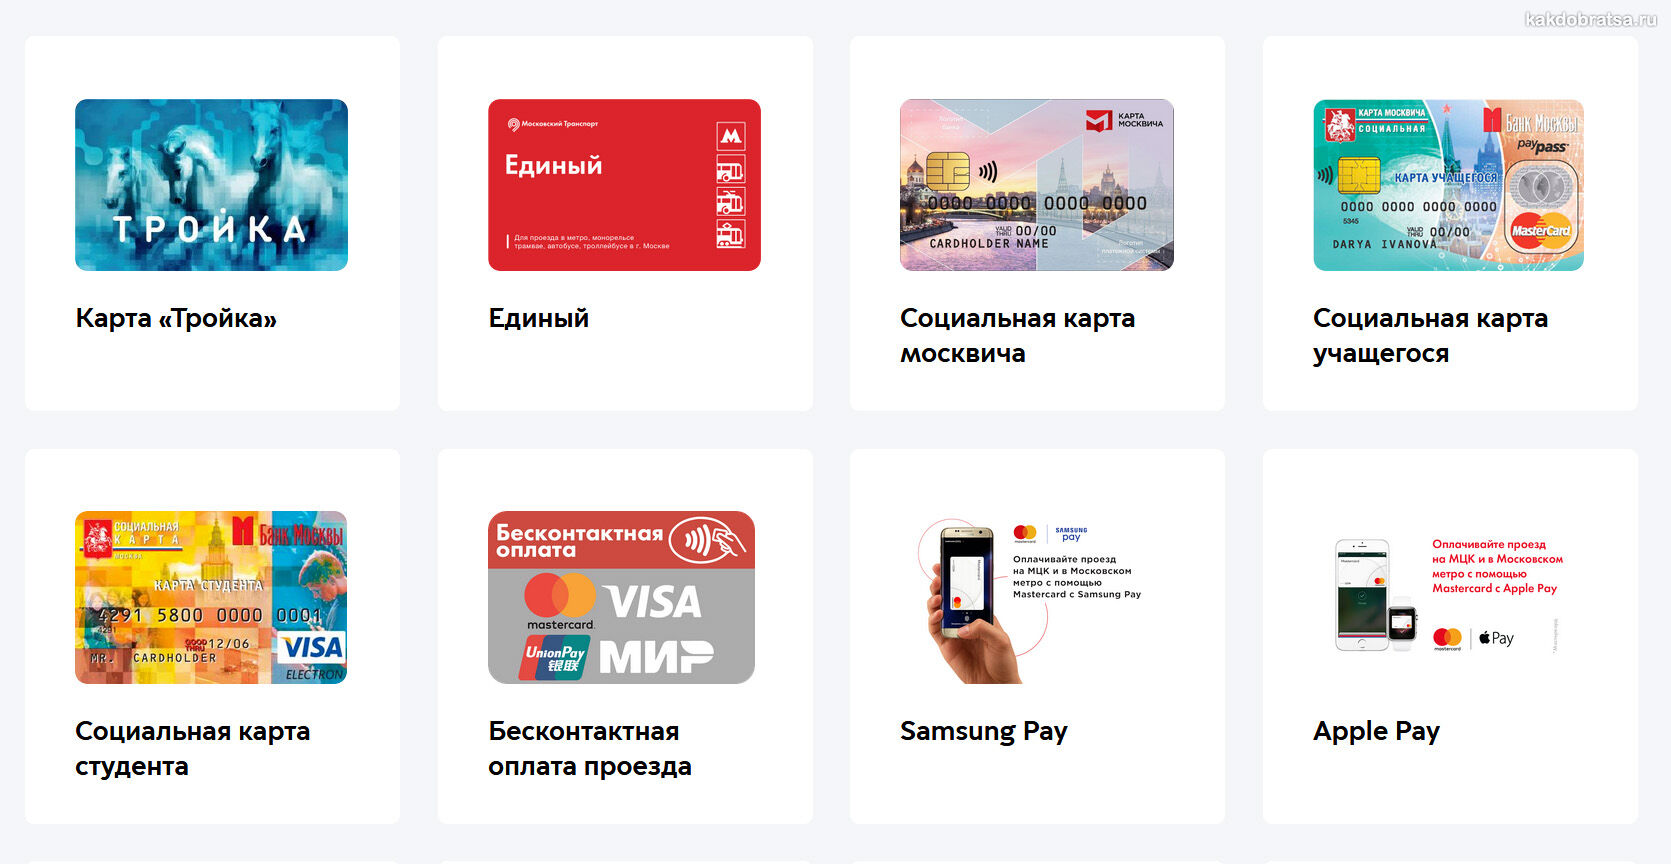 Moscow Metro Pay